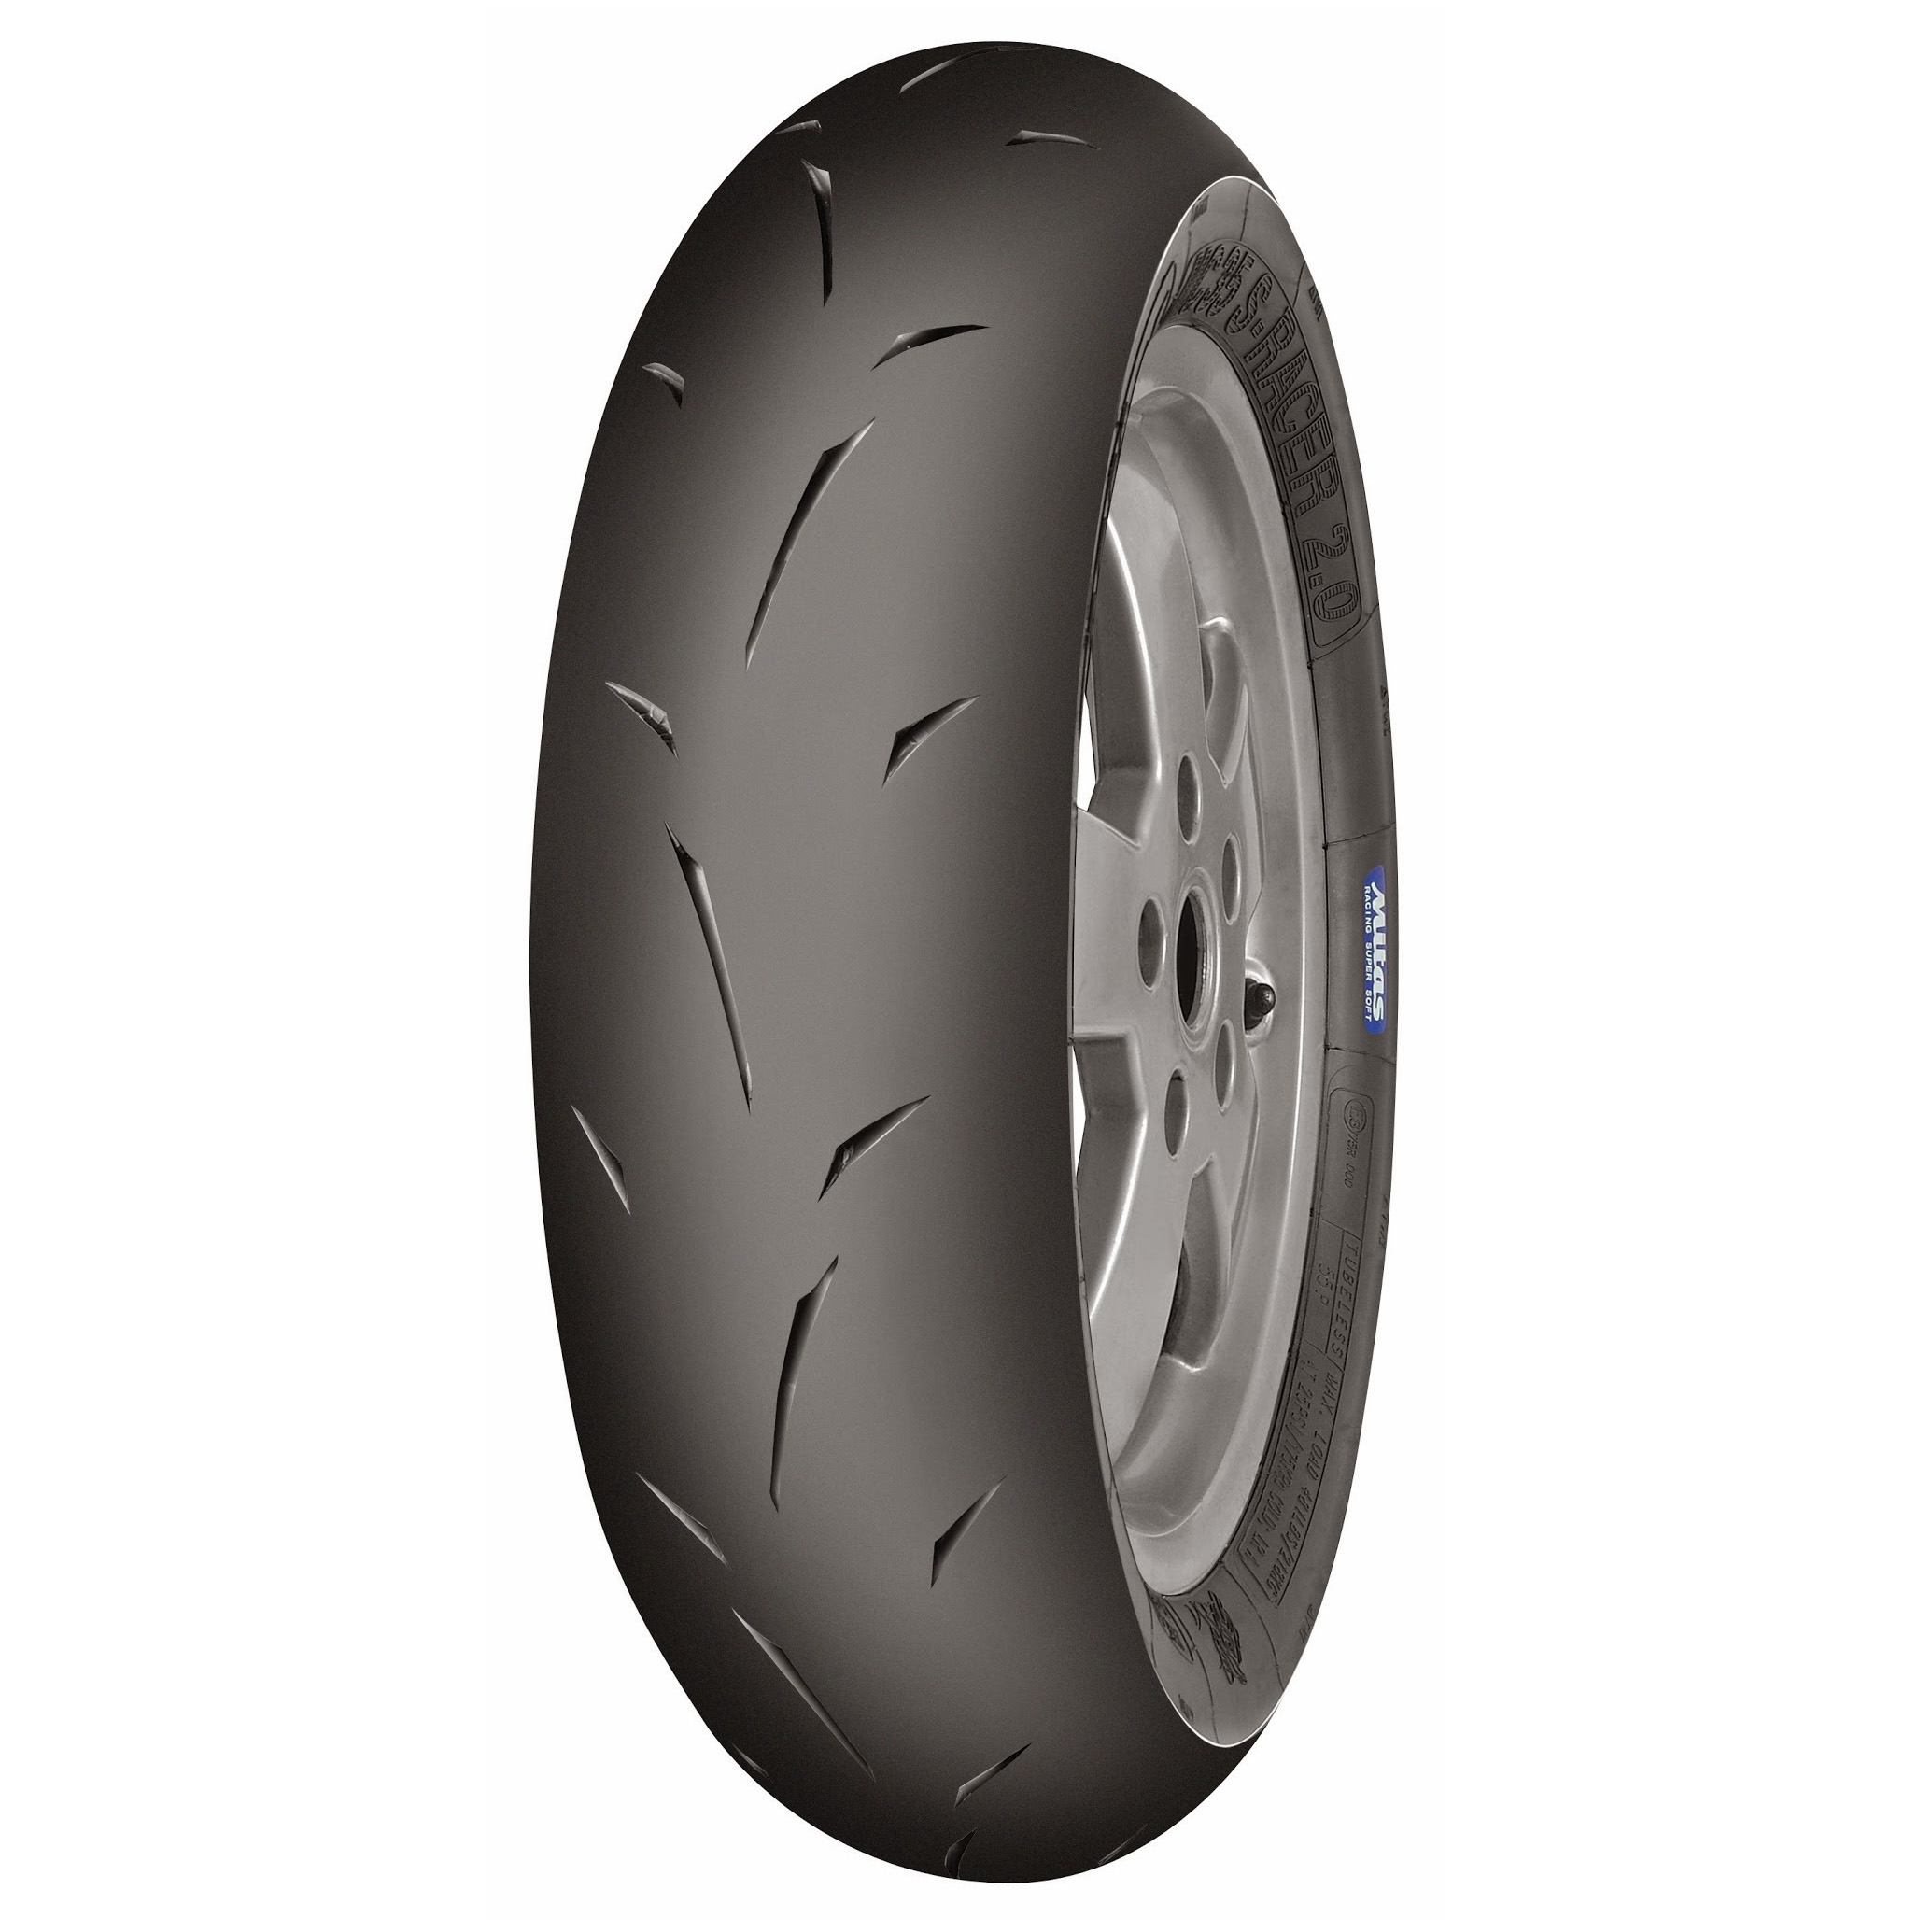 Gomme Nuove Goodyear 215/60 R17 96H ULTRAGRIP PERFORMANCE + SUV M+S pneumatici nuovi Invernale